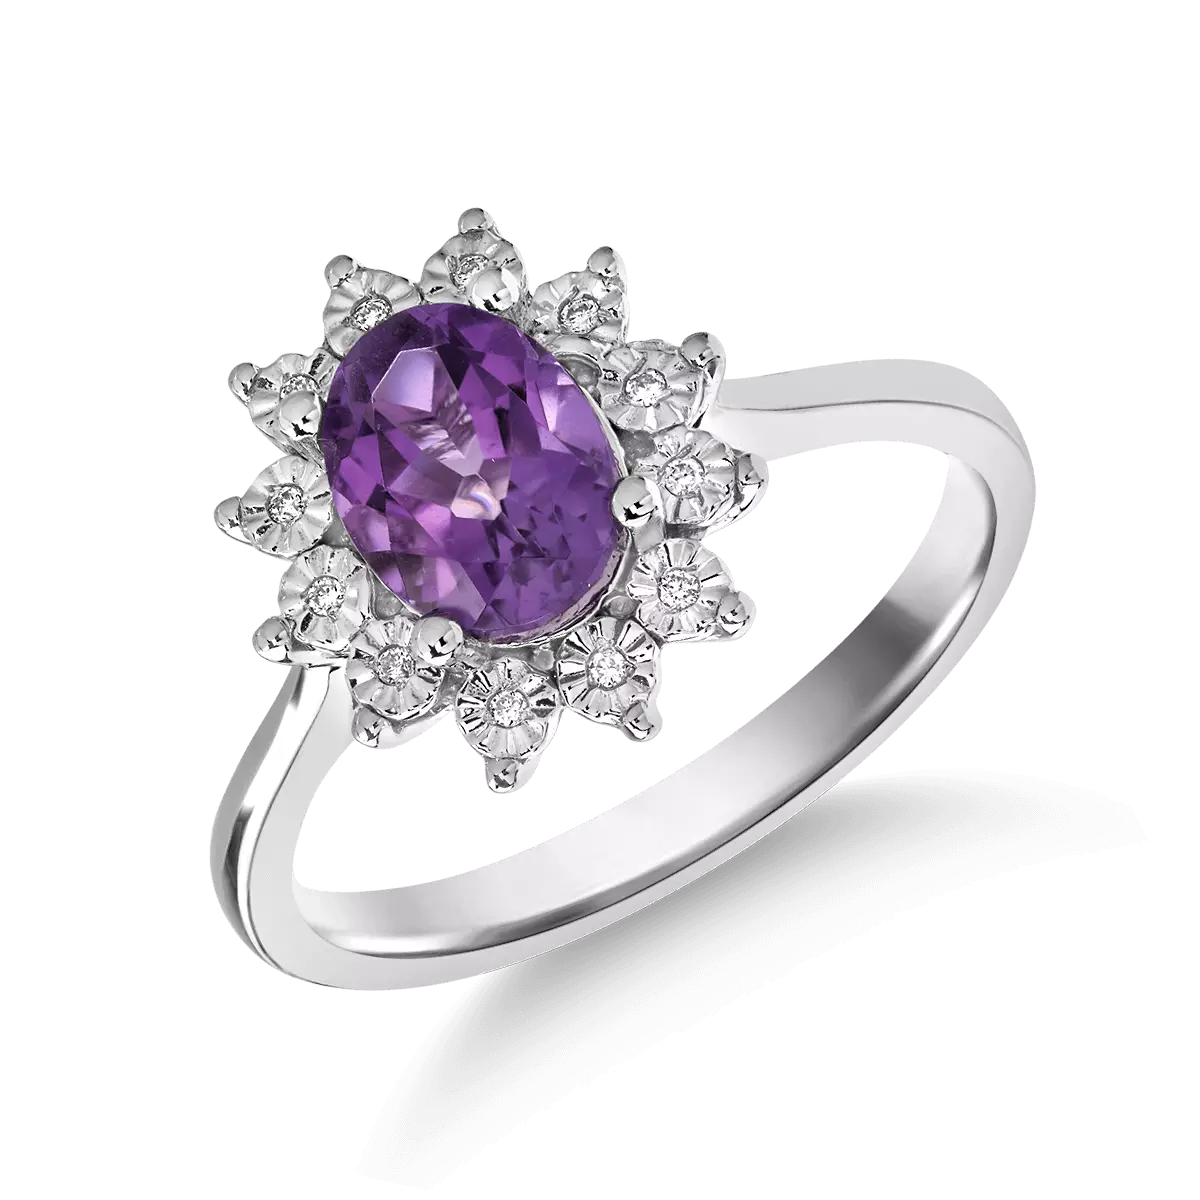 14K white gold ring with 1.04ct amethyst and 0.03ct diamonds